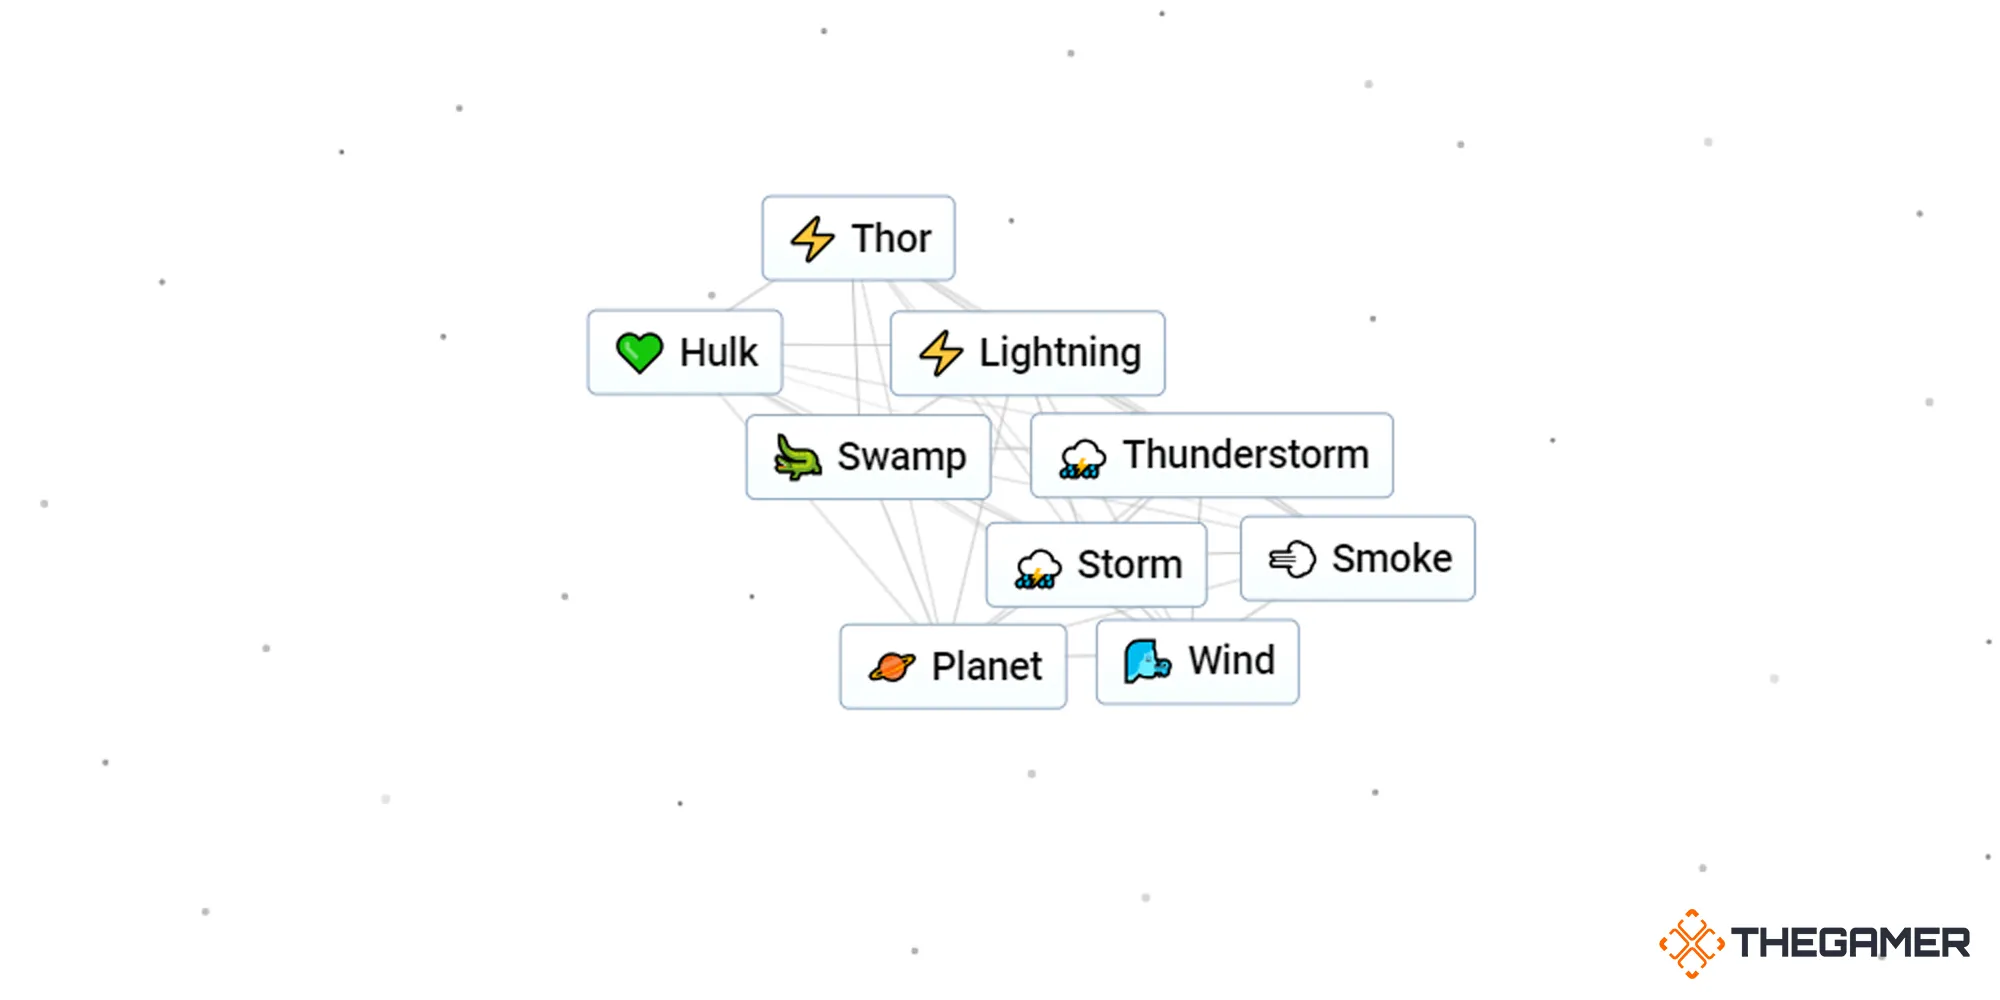 Infinite Craft - Crafting Thor By Combining Hulk And Lightning